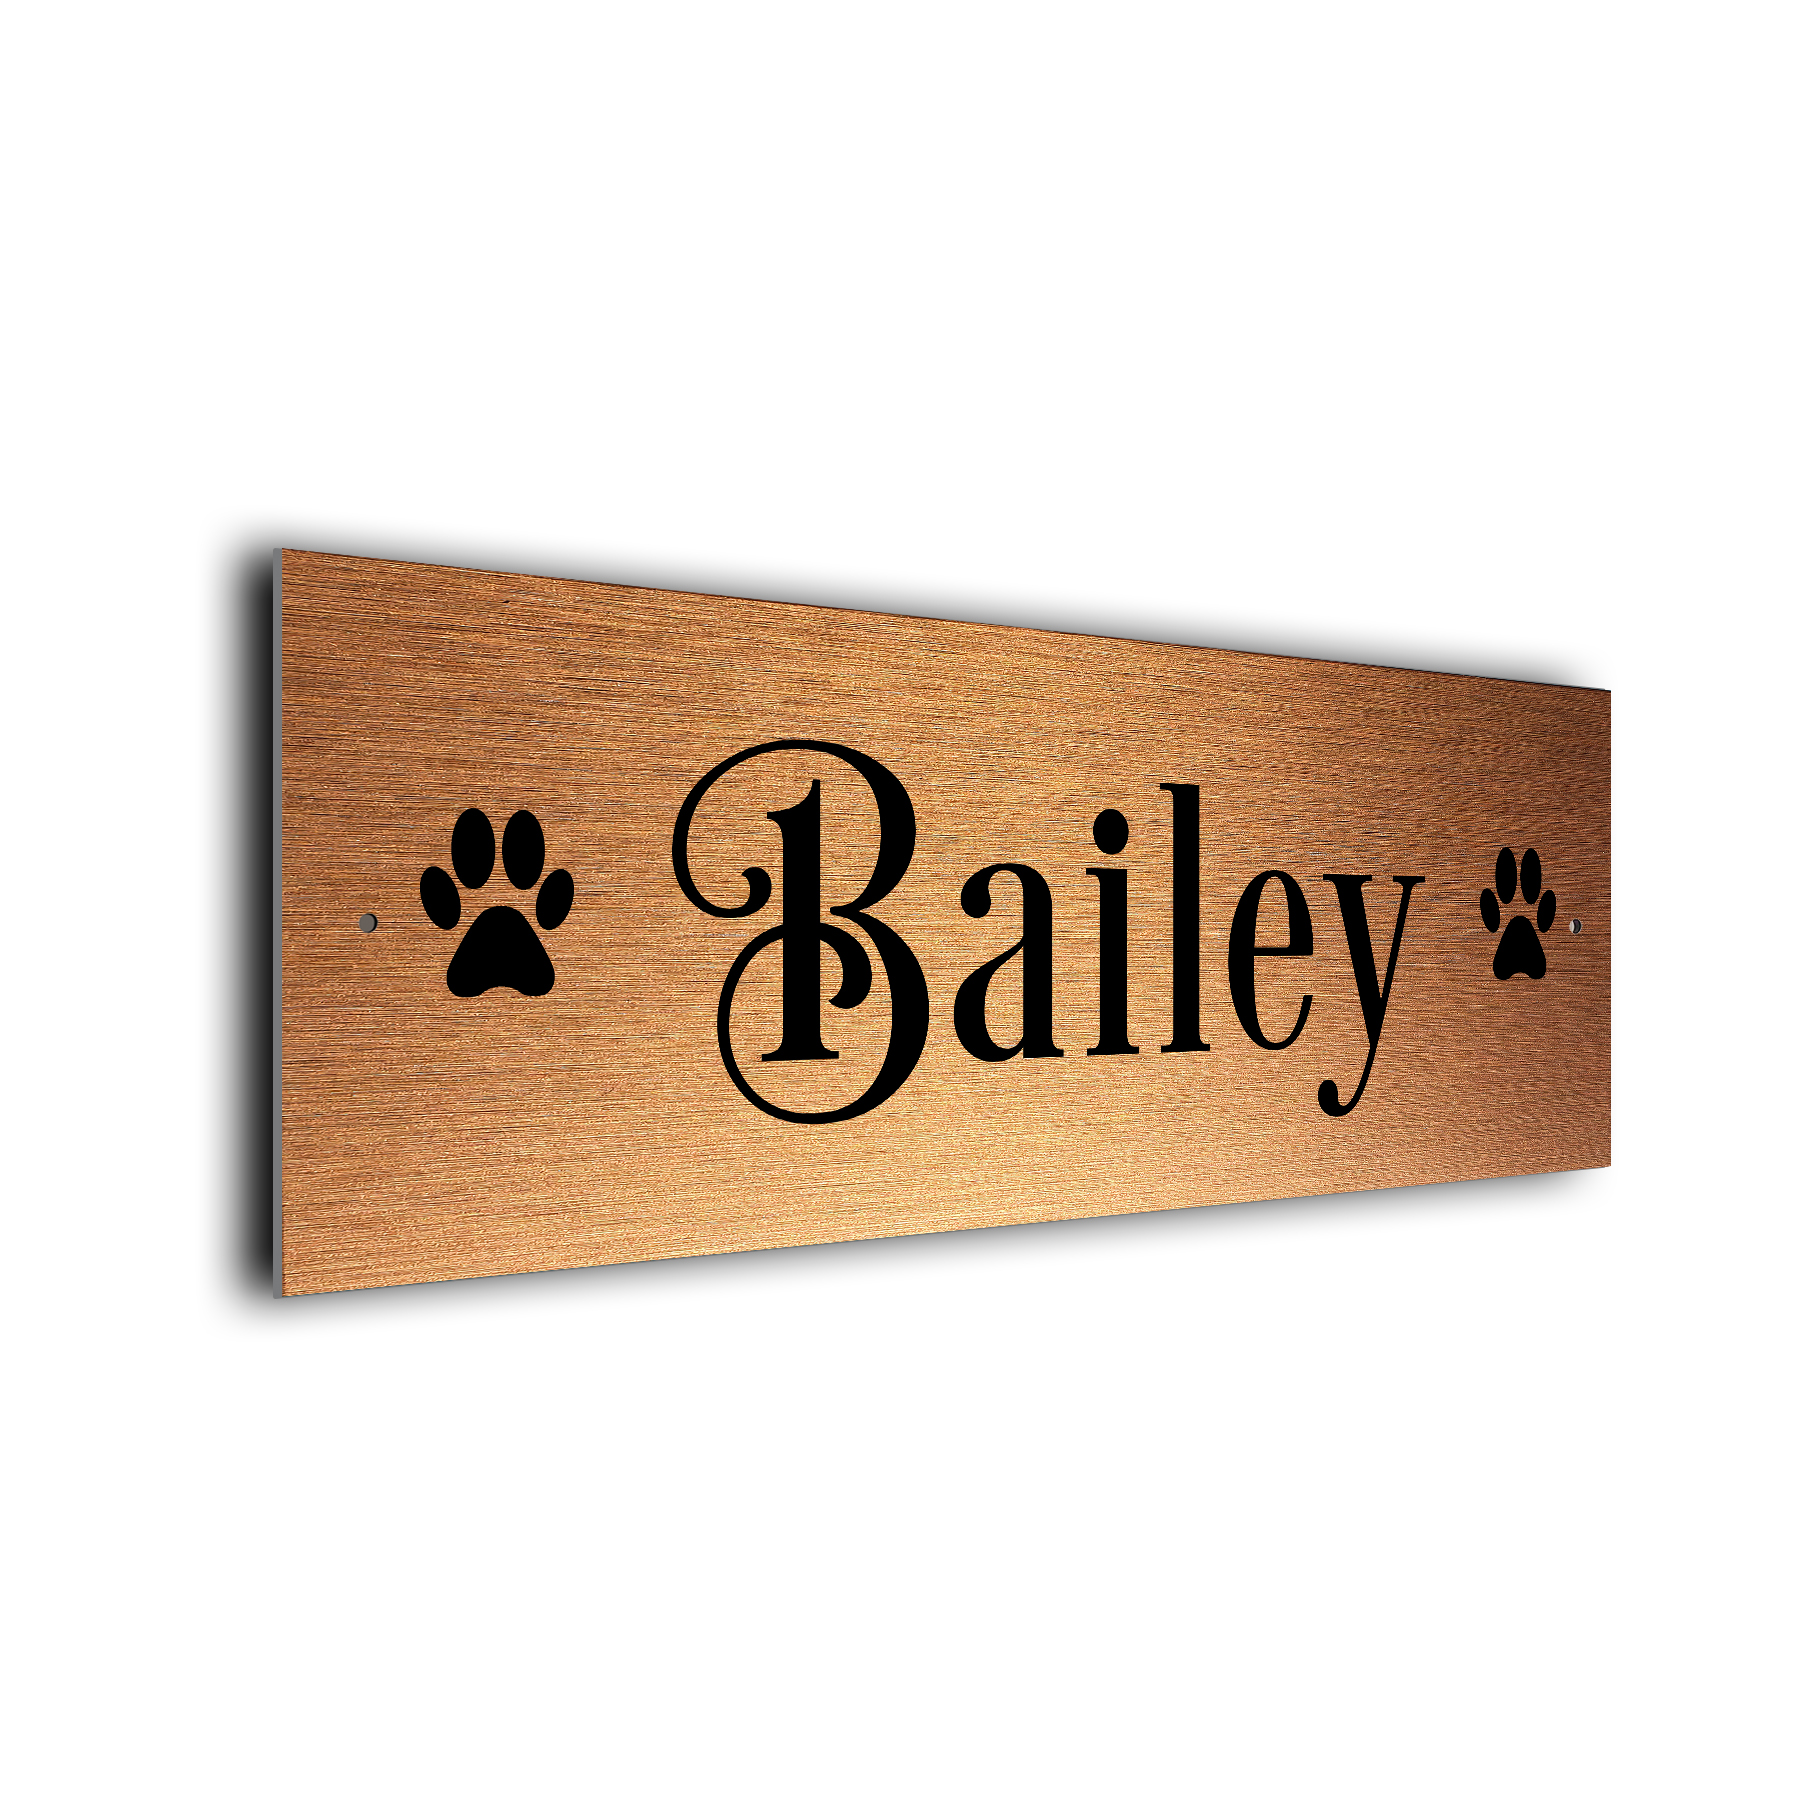 Copper Dog Name Signs